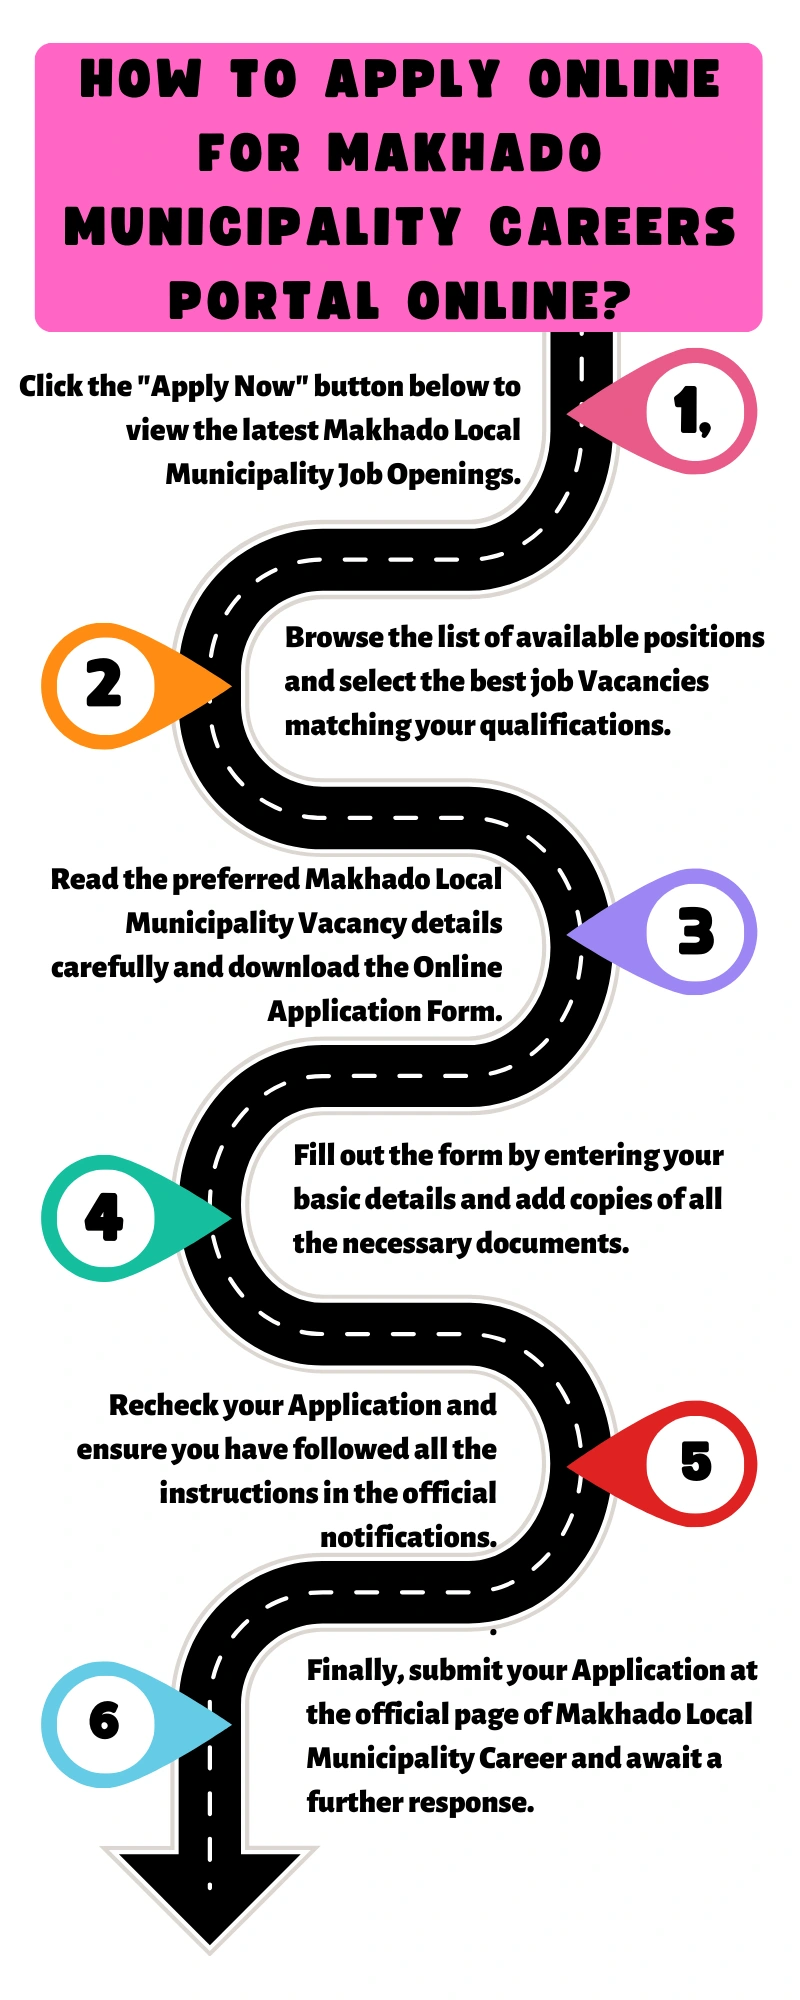 How to Apply online for Makhado Municipality Careers Portal Online?